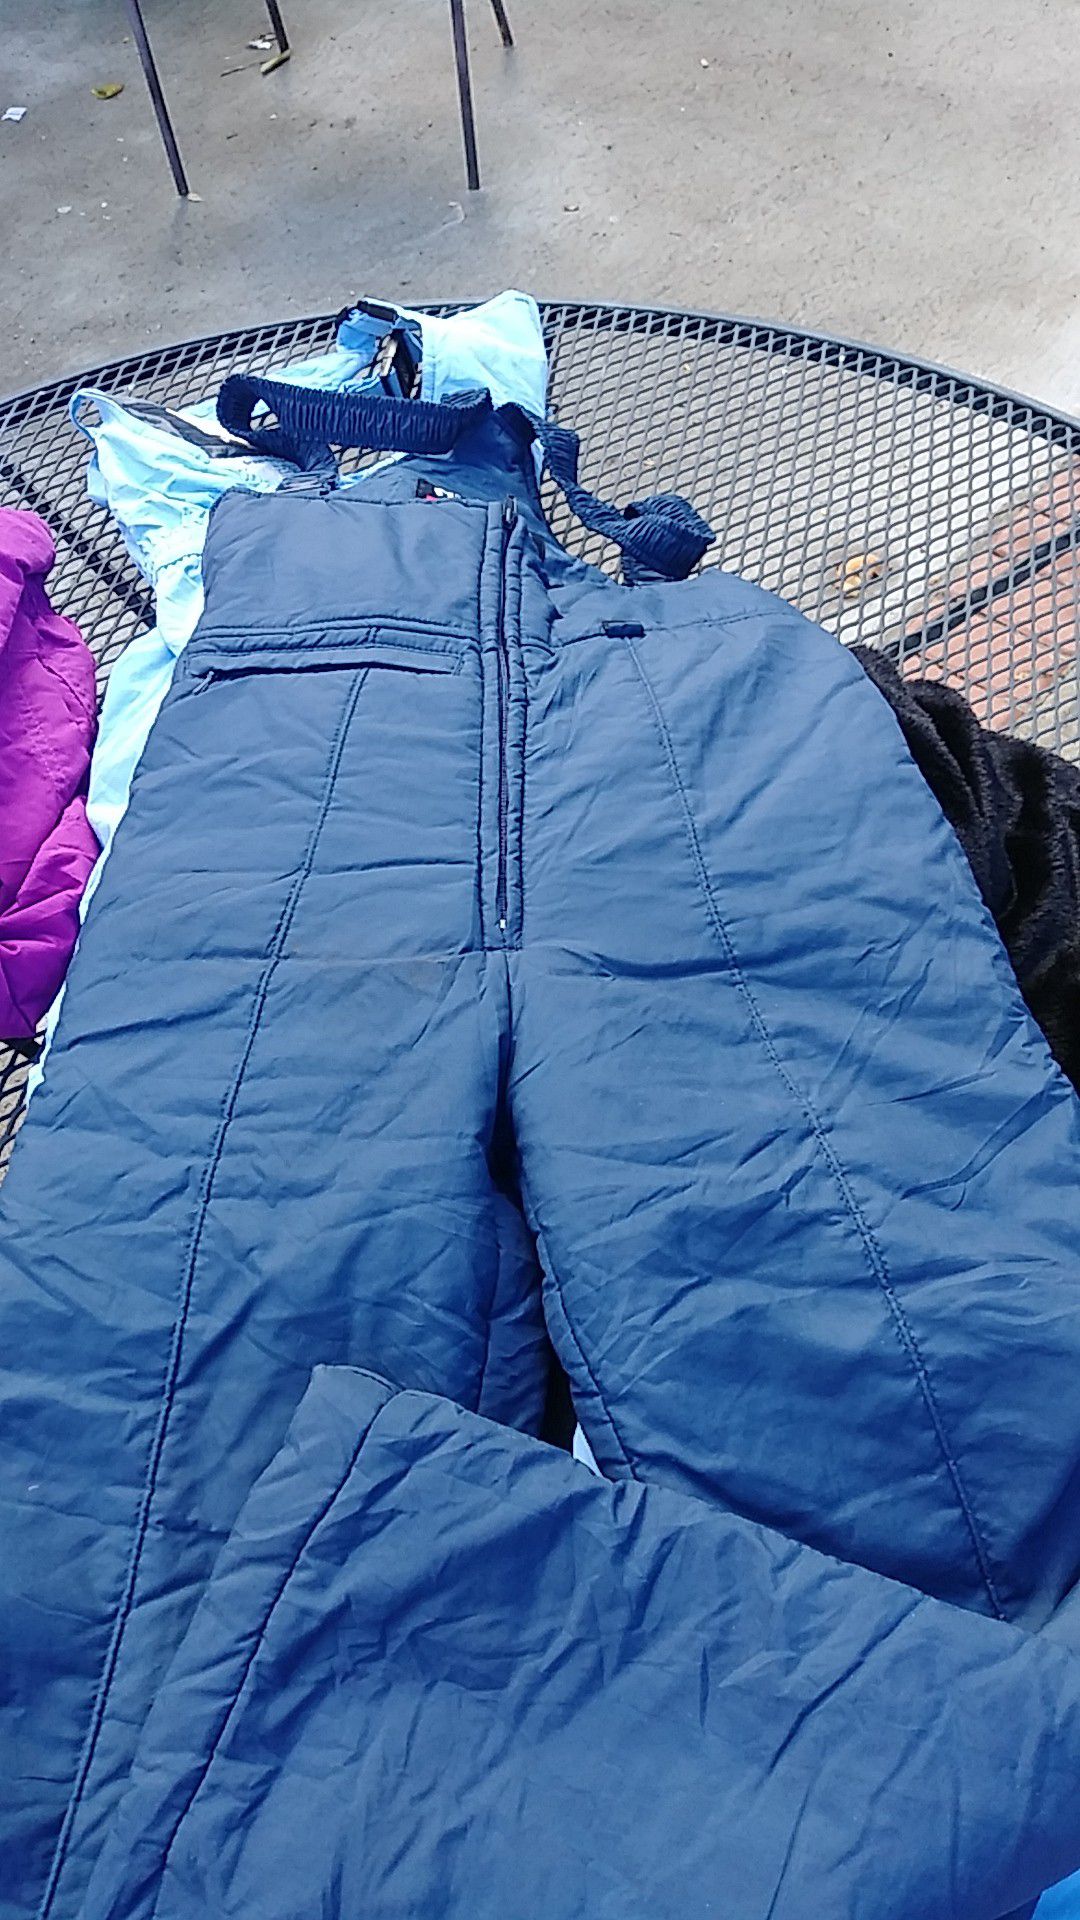 Snow bib size overall size 14